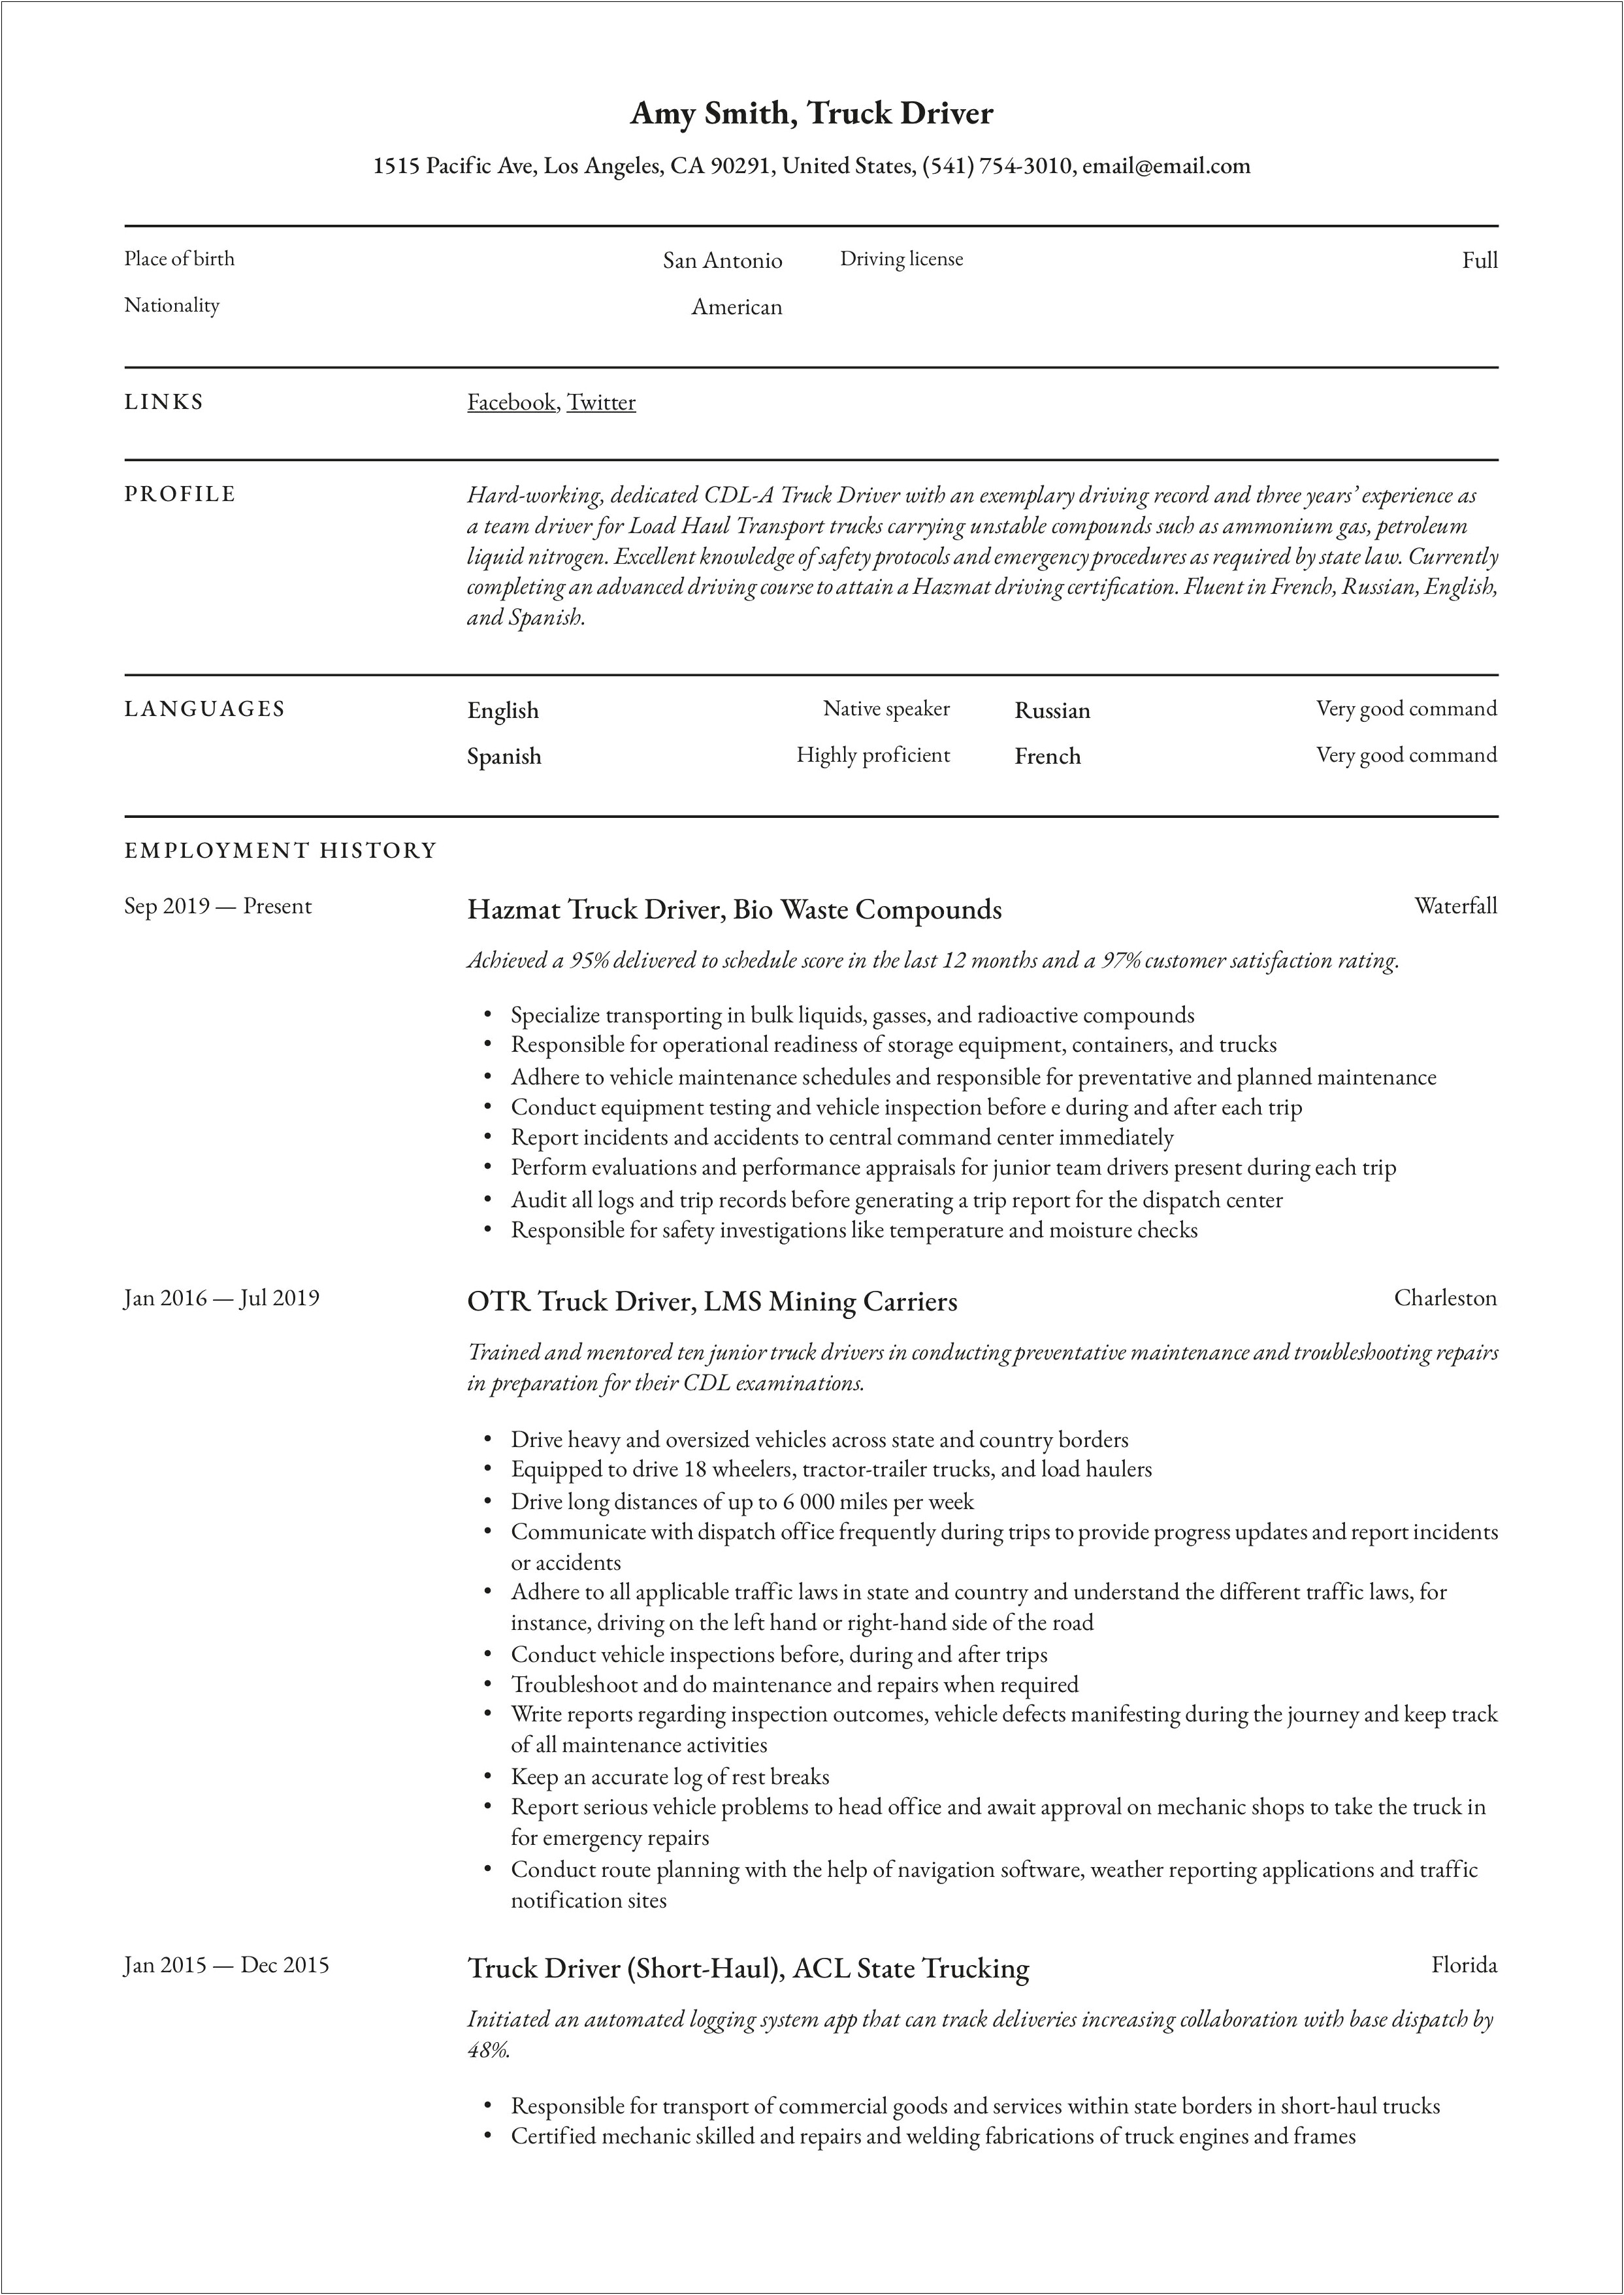 Truck Driver Resume Objective Statement